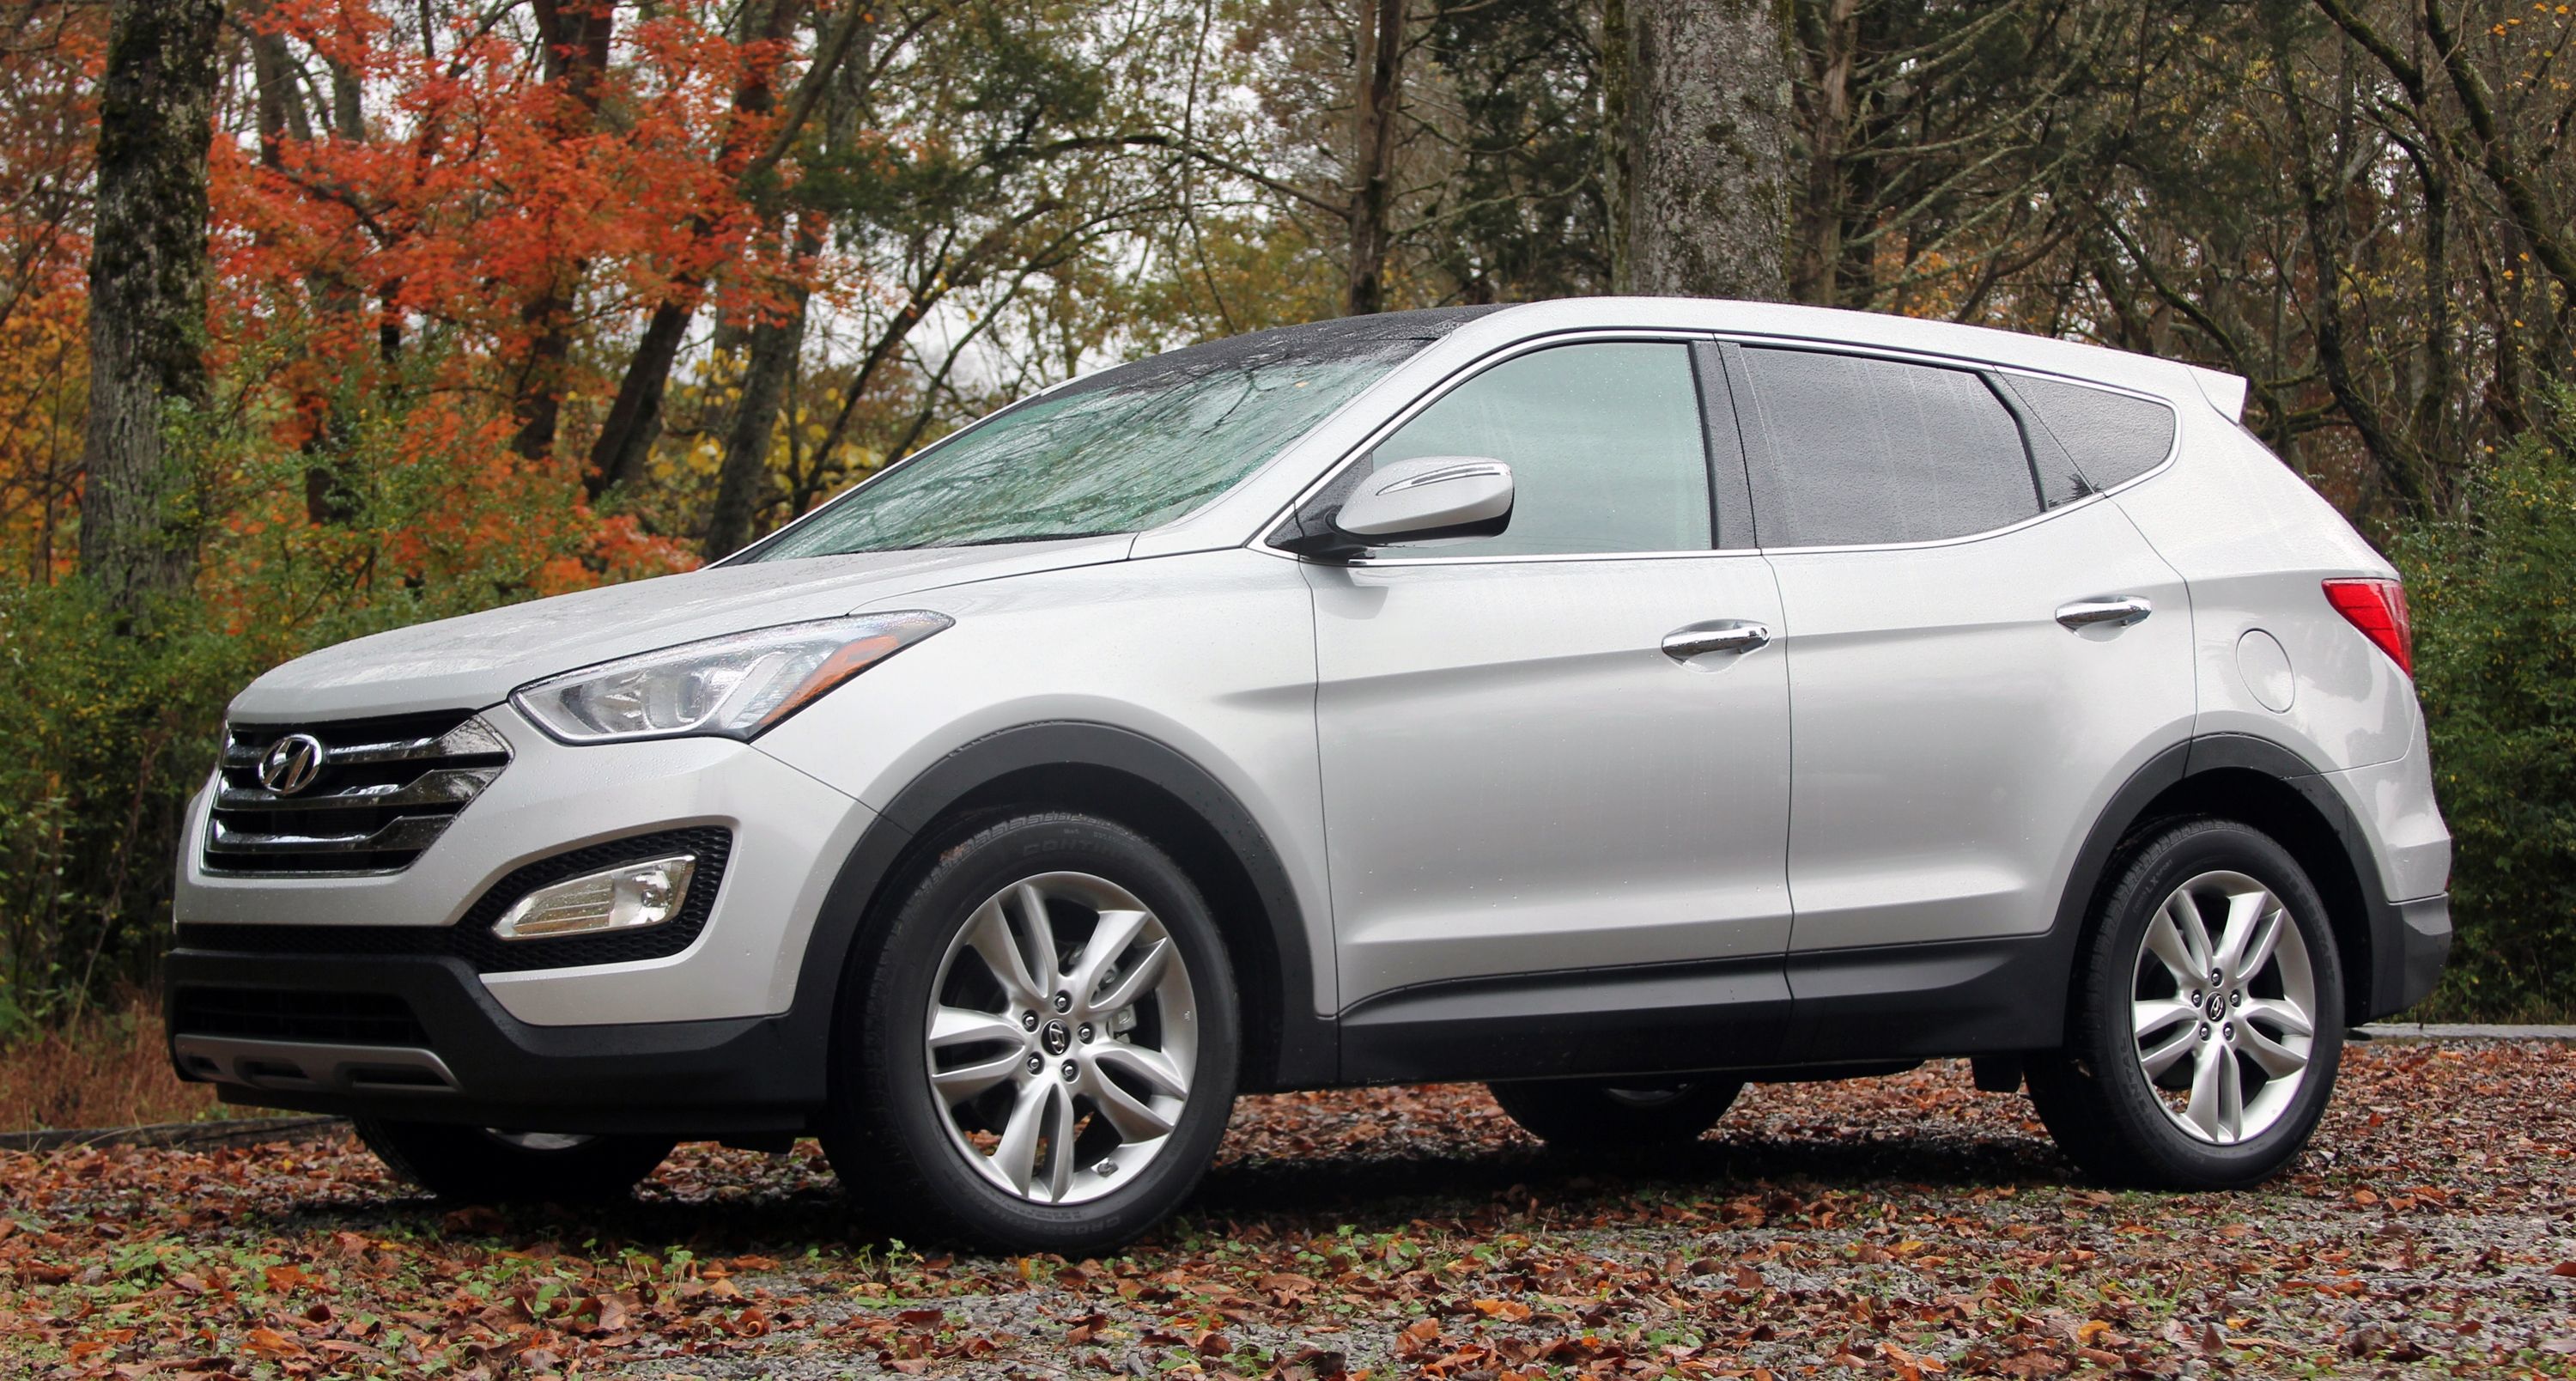  Christian Moe spent a week with the Santa Fe. Did he finally find a crossover he didn't hate?